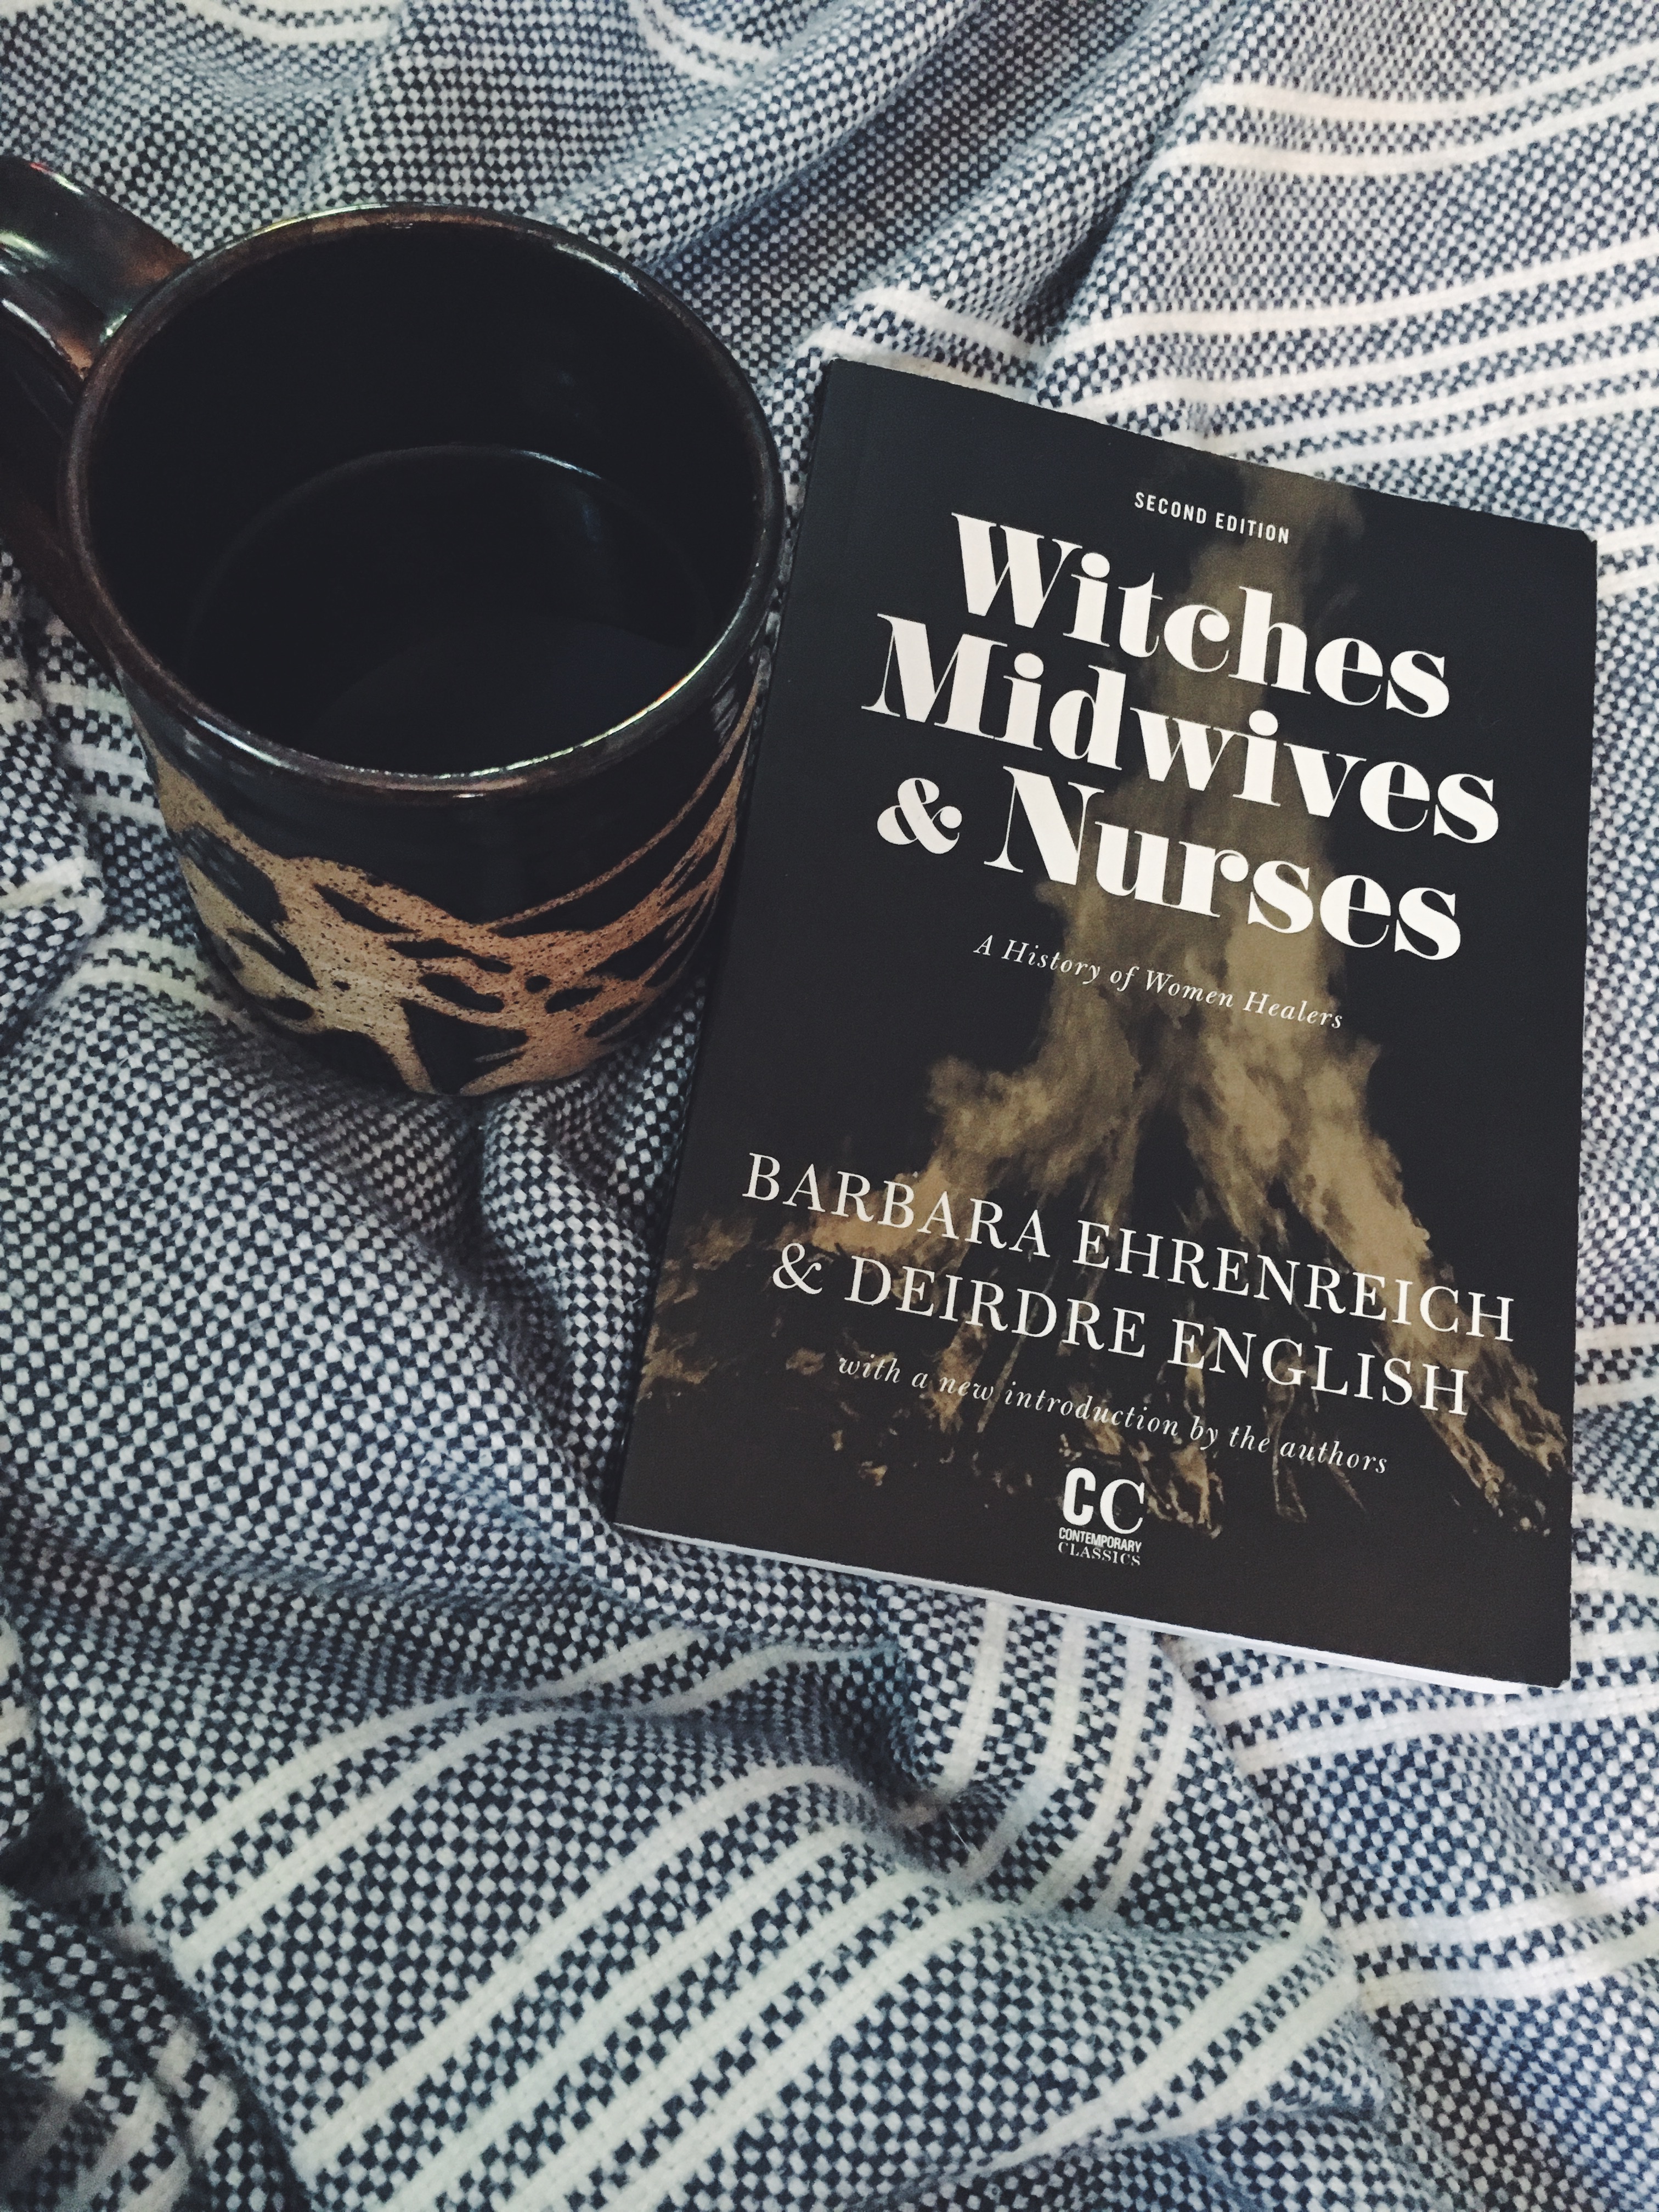 Spellbook Saturday: Witches, Midwives & Nurses